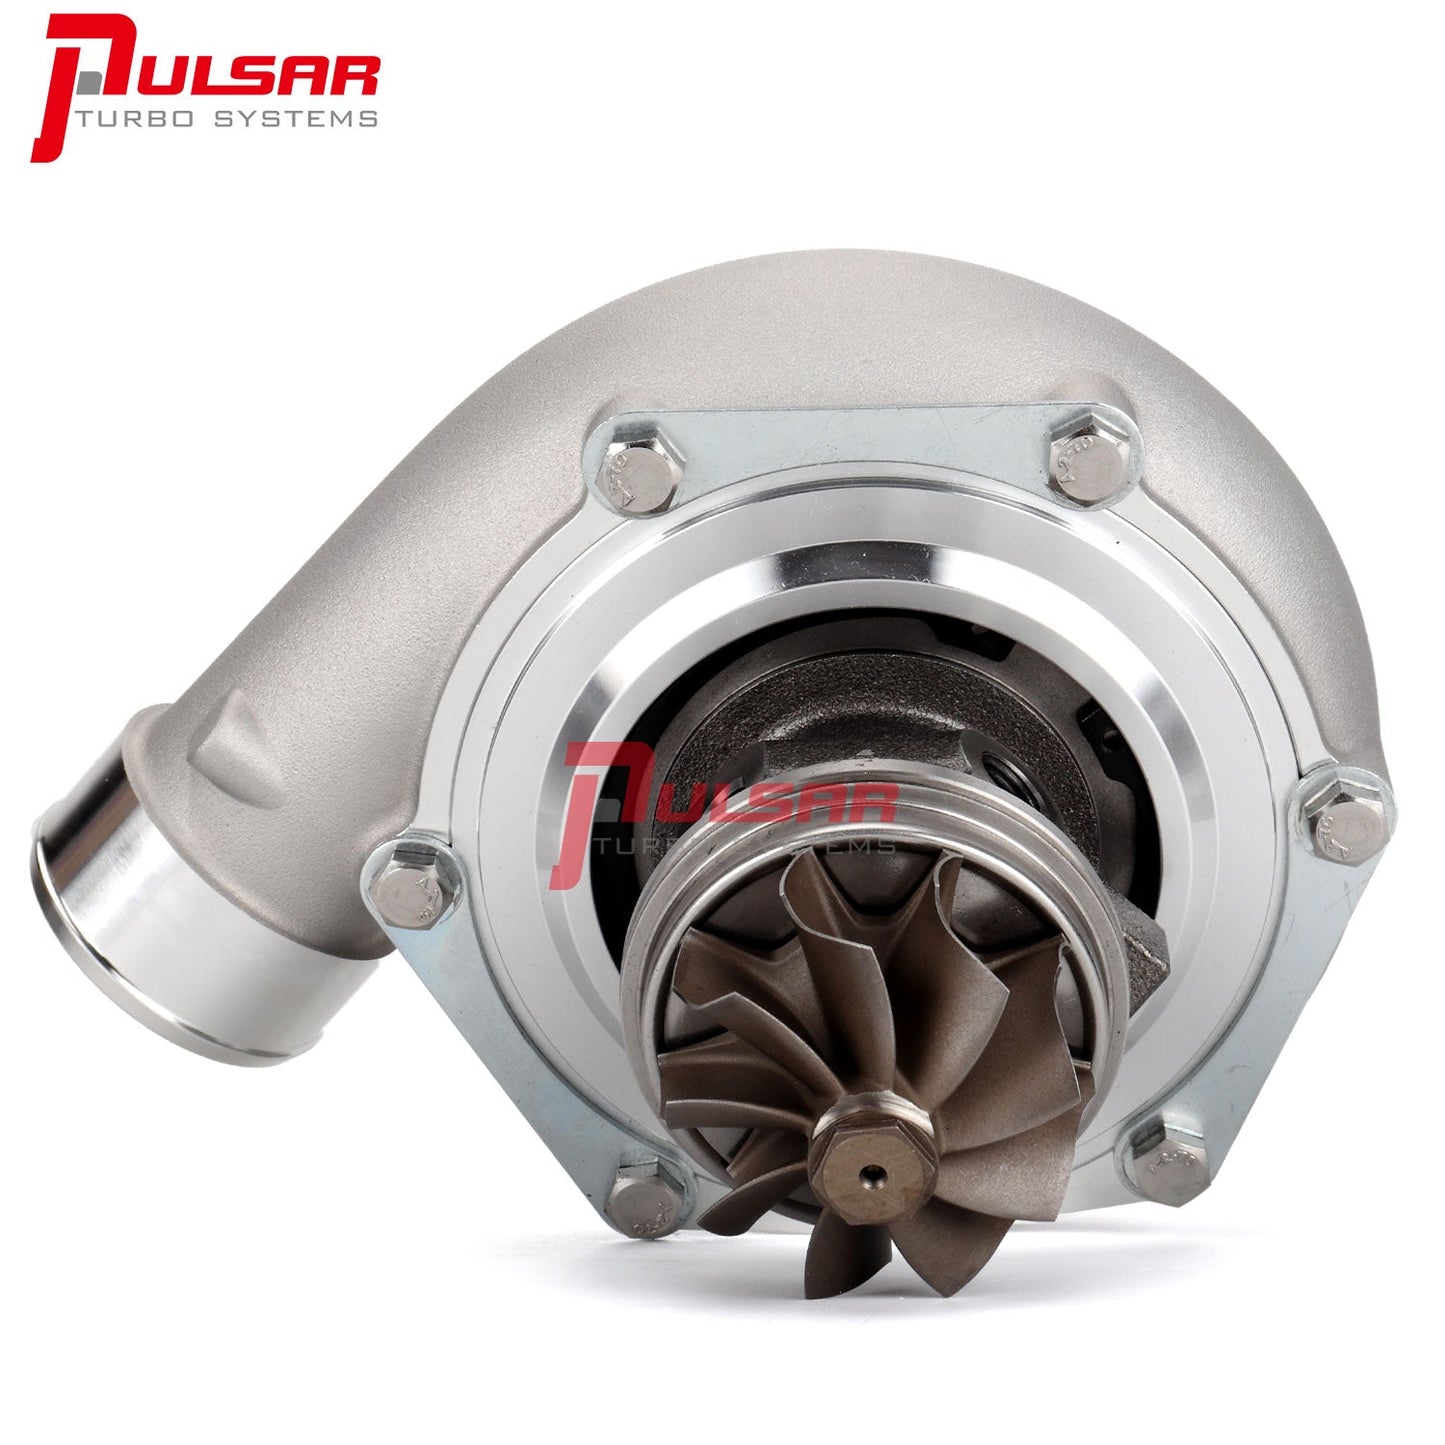 PULSAR Next GEN GTX3584 Supercore for Ford Falcon to replace the factory GT3582R